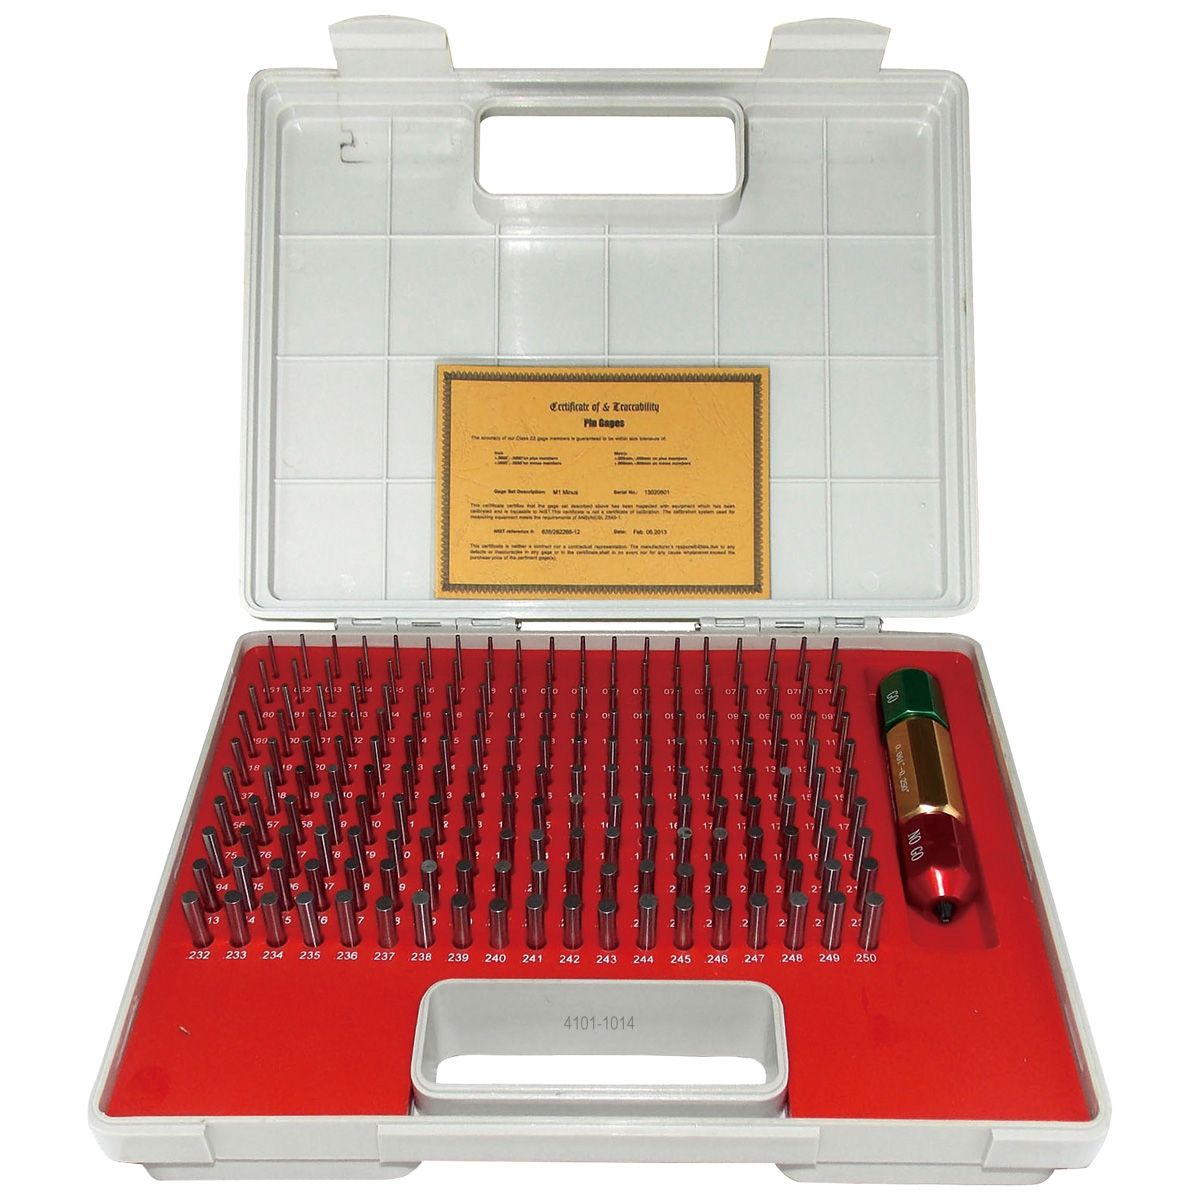 PRO-SERIES 190 PIECE .061-.250" PIN GAGE SET WITH CERTIFICATE (4101-0041)